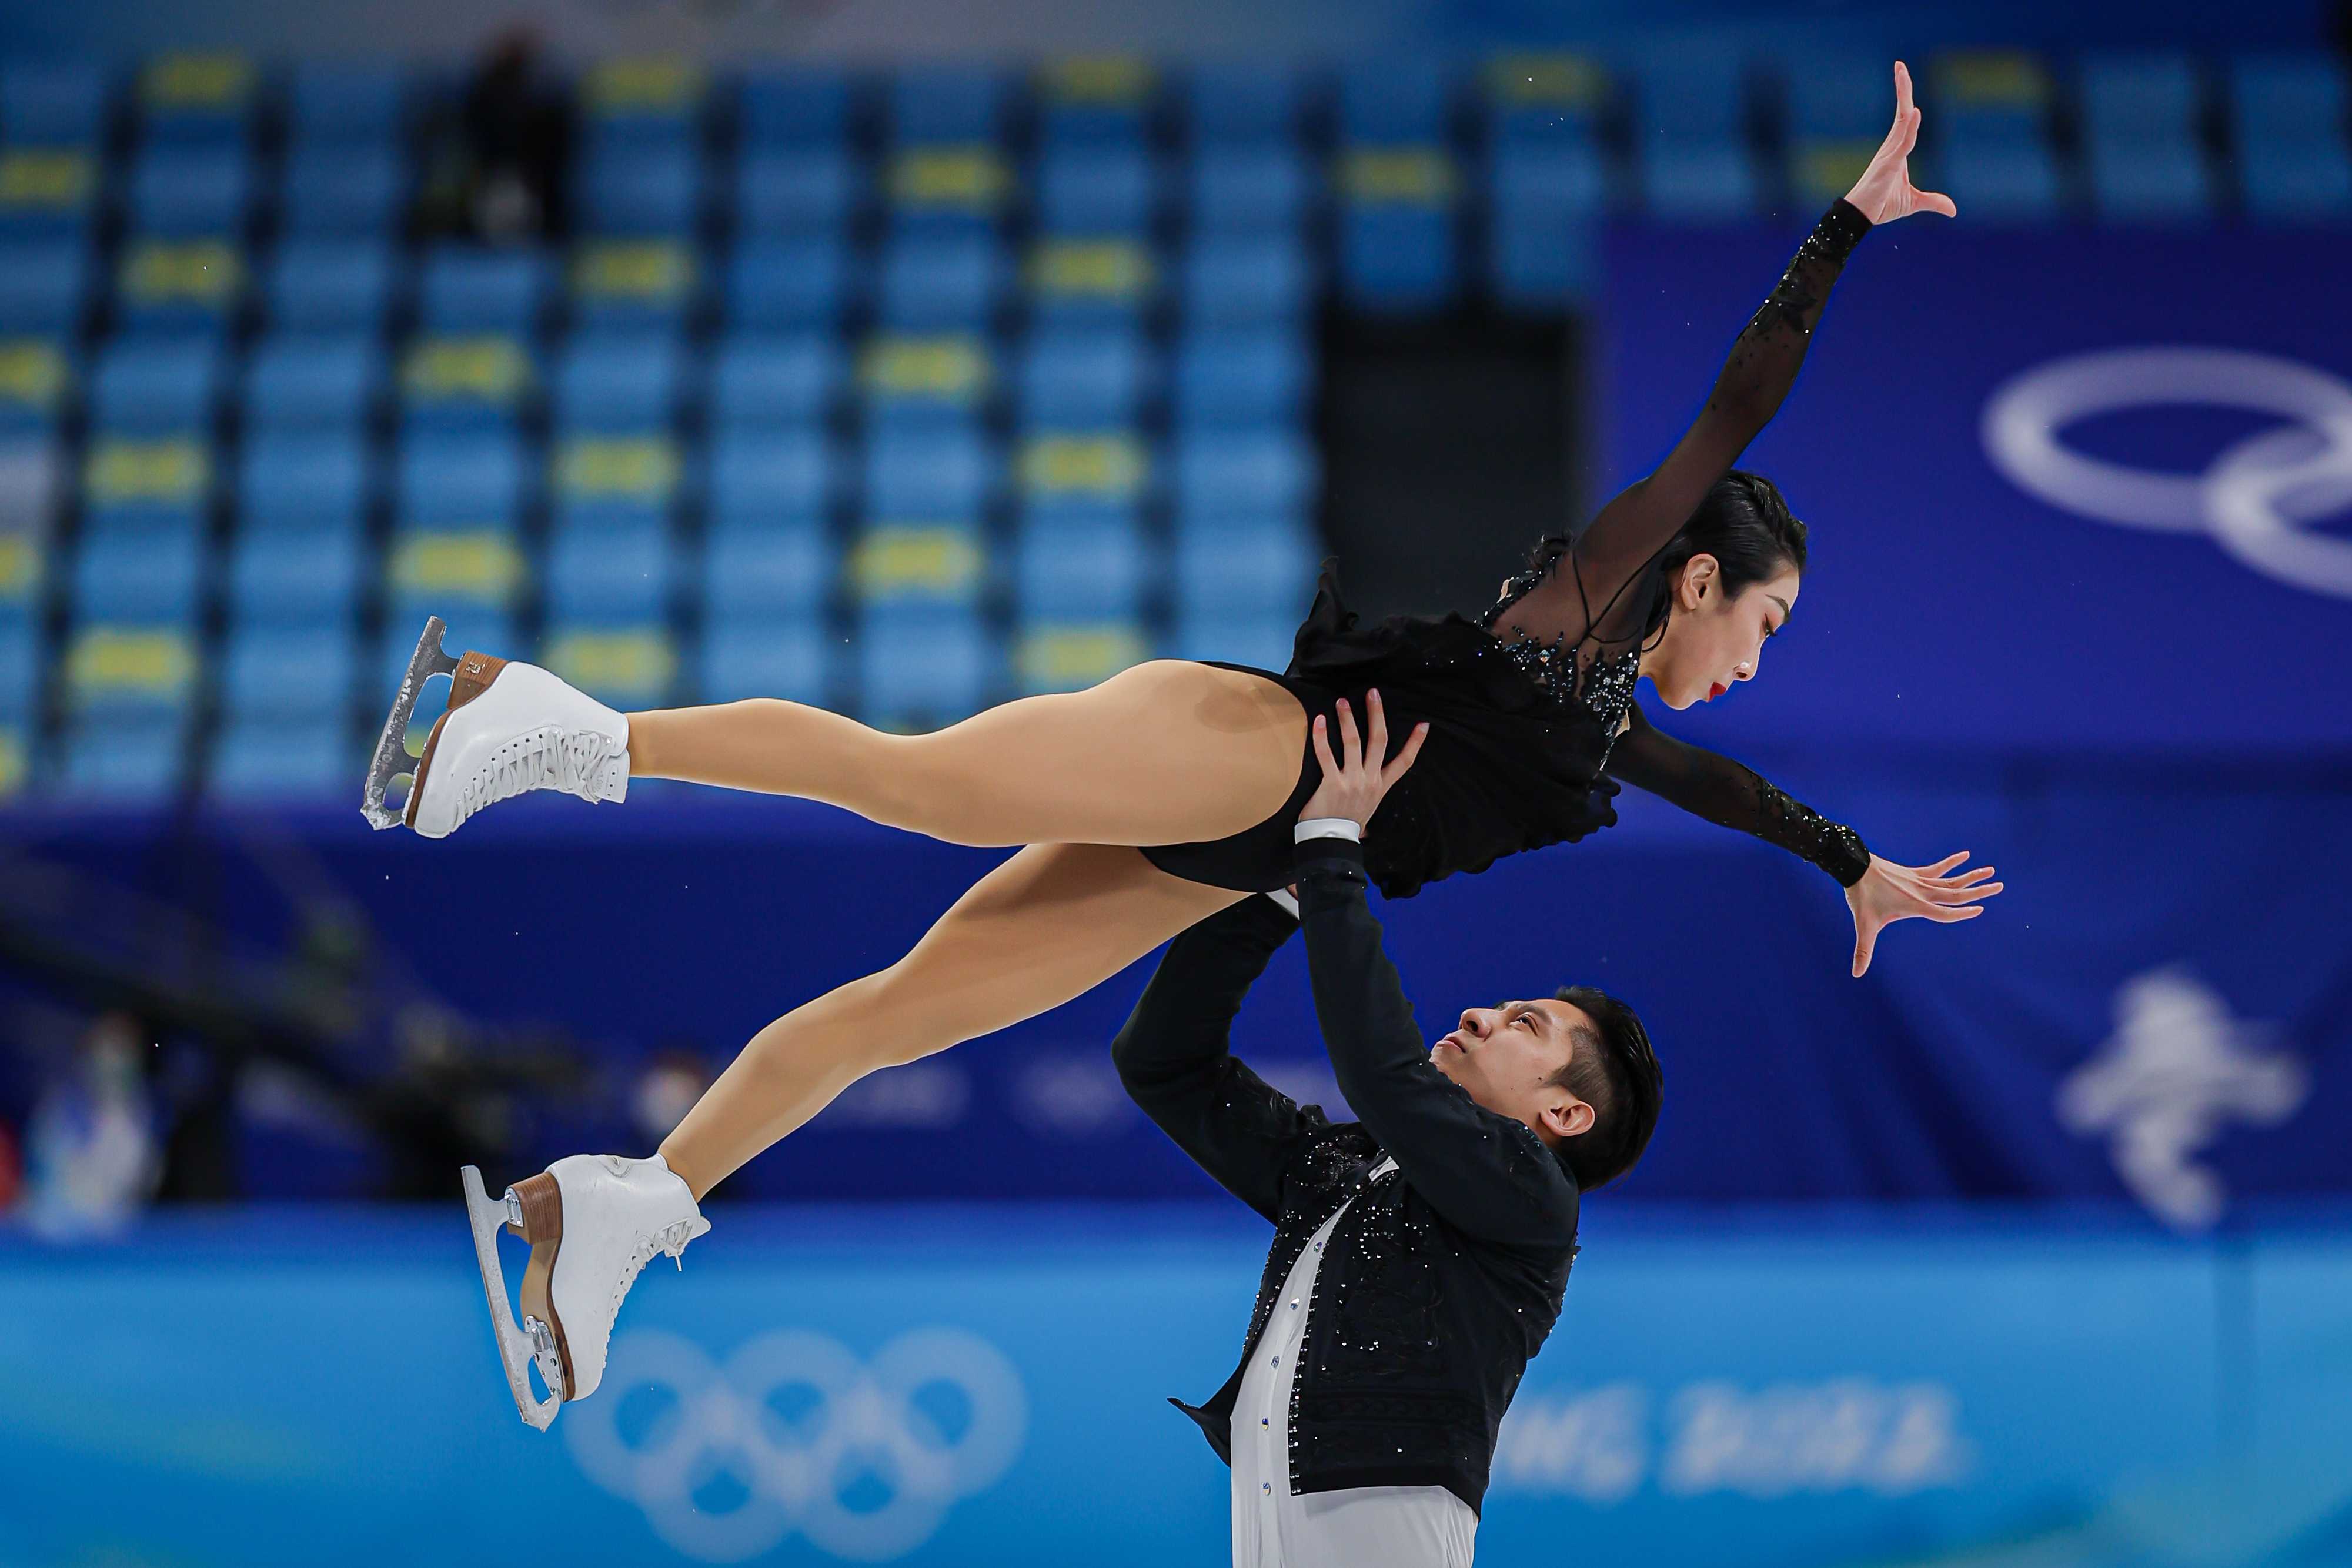 Winter Olympics Video Chinas Sui Wenjing, Han Cong set pairs record in figure skating